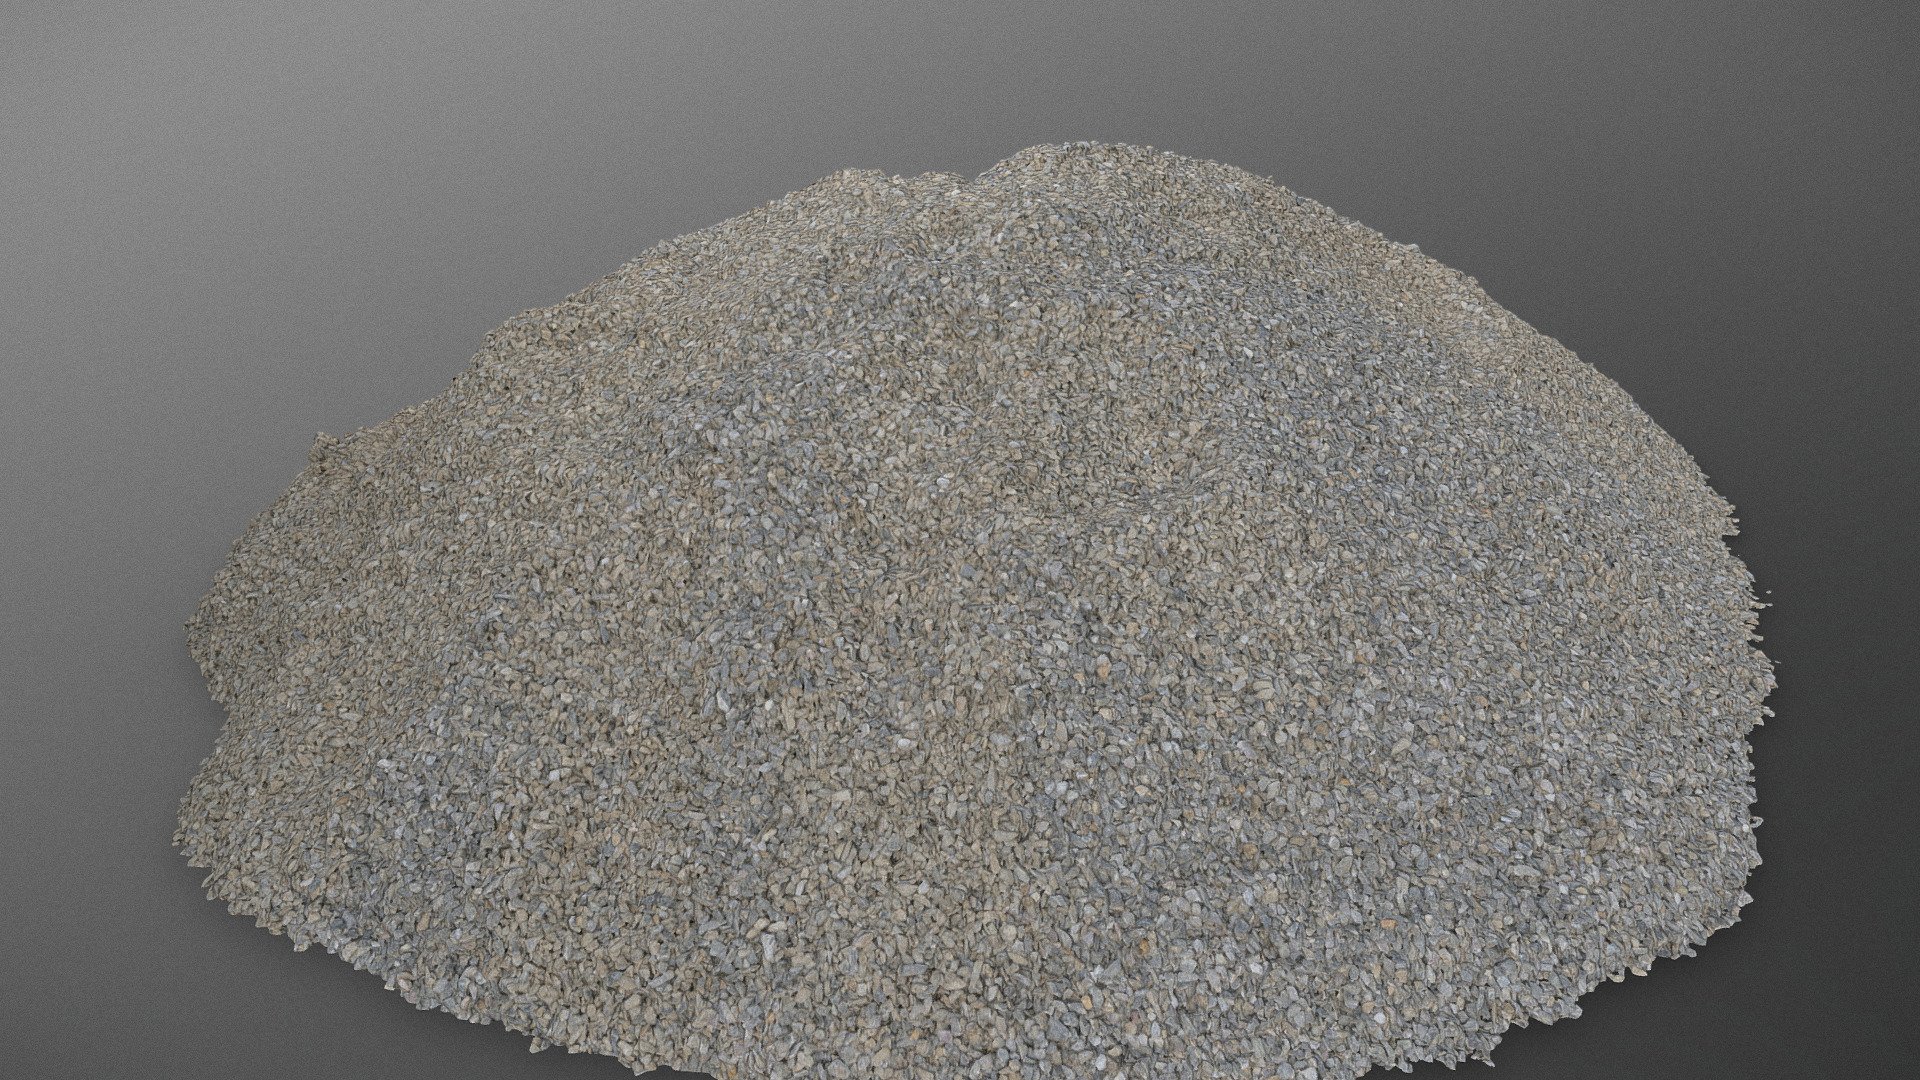 Round Gray Paving gravel heap pile mound of building pavement construction material small stones pebble of quartz

Photogrammetry scan 140x36MP, 4x8K texture + hd normals - Round paving gravel pile - Buy Royalty Free 3D model by matousekfoto 3d model